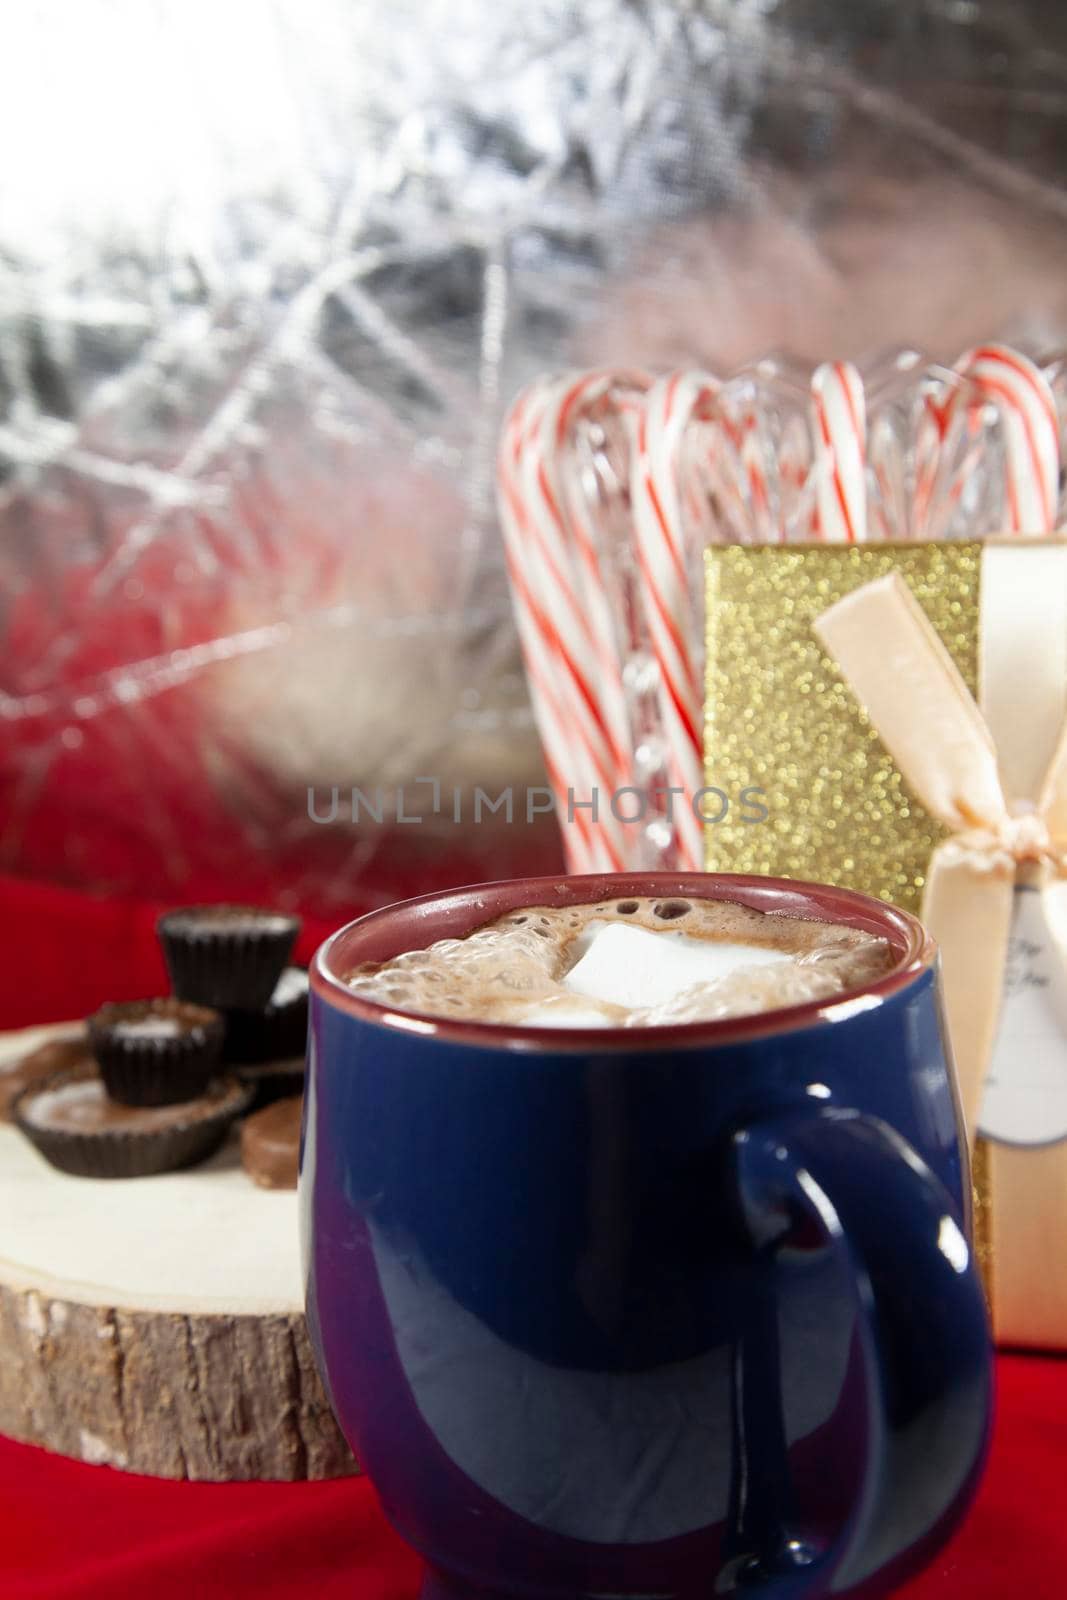 Blue and red mug filled with hot chocolate and two slightly melted marshmallows, with chocolates on a wooden stump, candy canes, and a golden present in the background